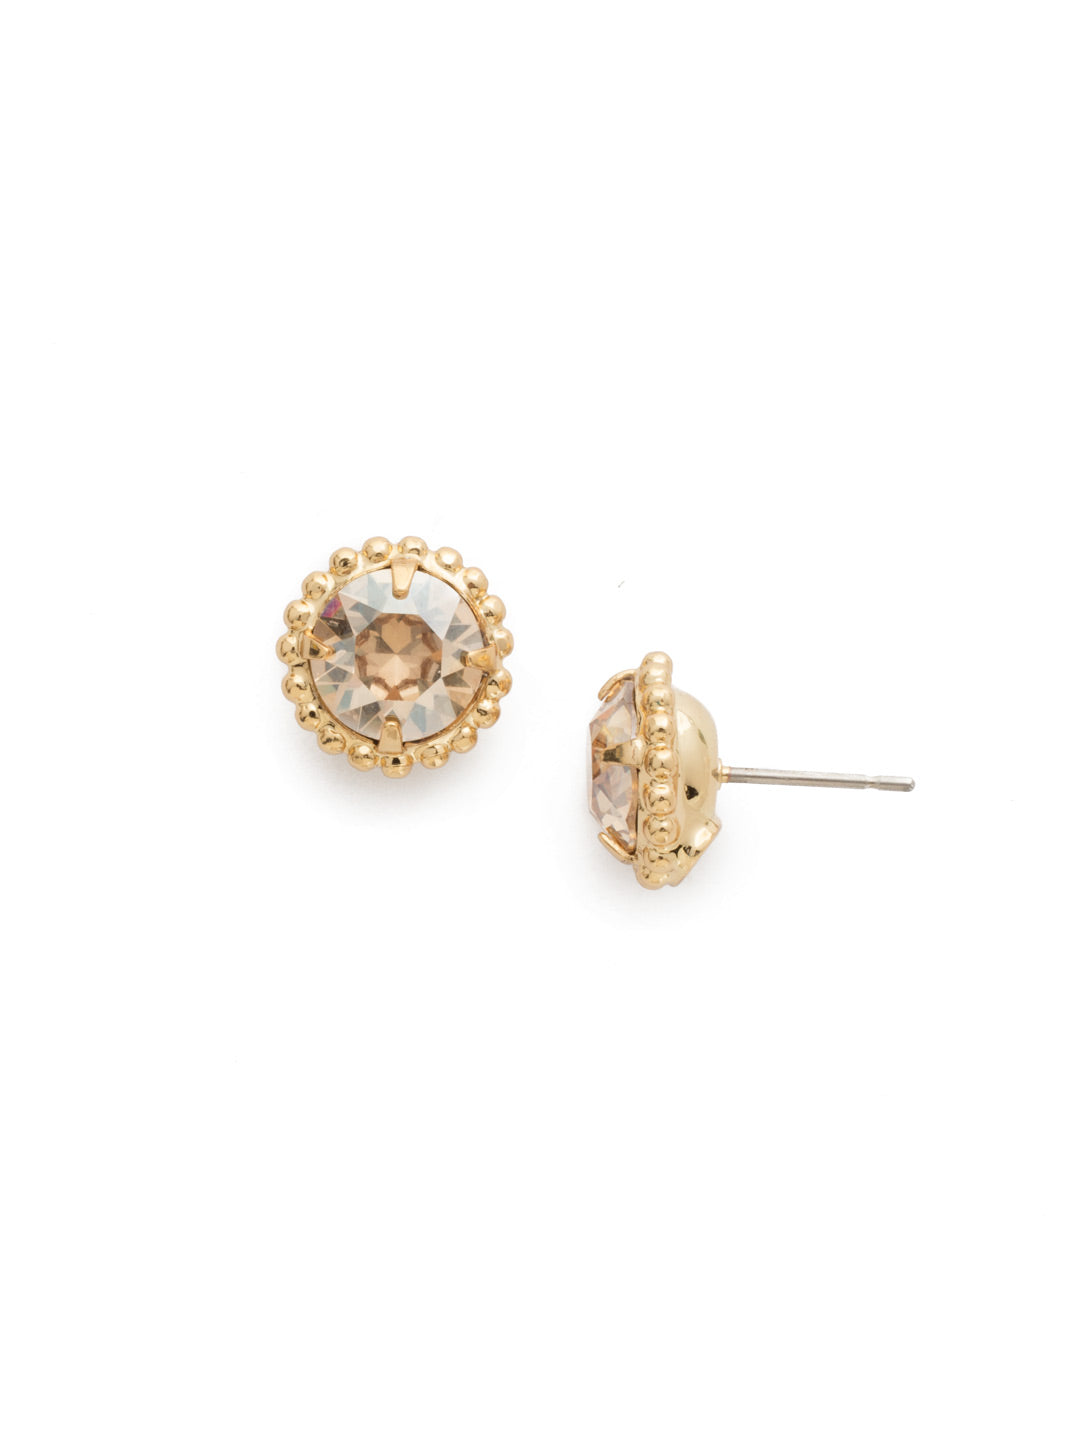 Simplicity Stud Earrings - EBY38BGDCH - <p>A timeless classic, the Simplicity Stud Earrings feature round cut crystals in a variety of colors; accented with a halo of metal beaded detail. Need help picking a stud? <a href="https://www.sorrelli.com/blogs/sisterhood/round-stud-earrings-101-a-rundown-of-sizes-styles-and-sparkle">Check out our size guide!</a> From Sorrelli's Dark Champagne collection in our Bright Gold-tone finish.</p>